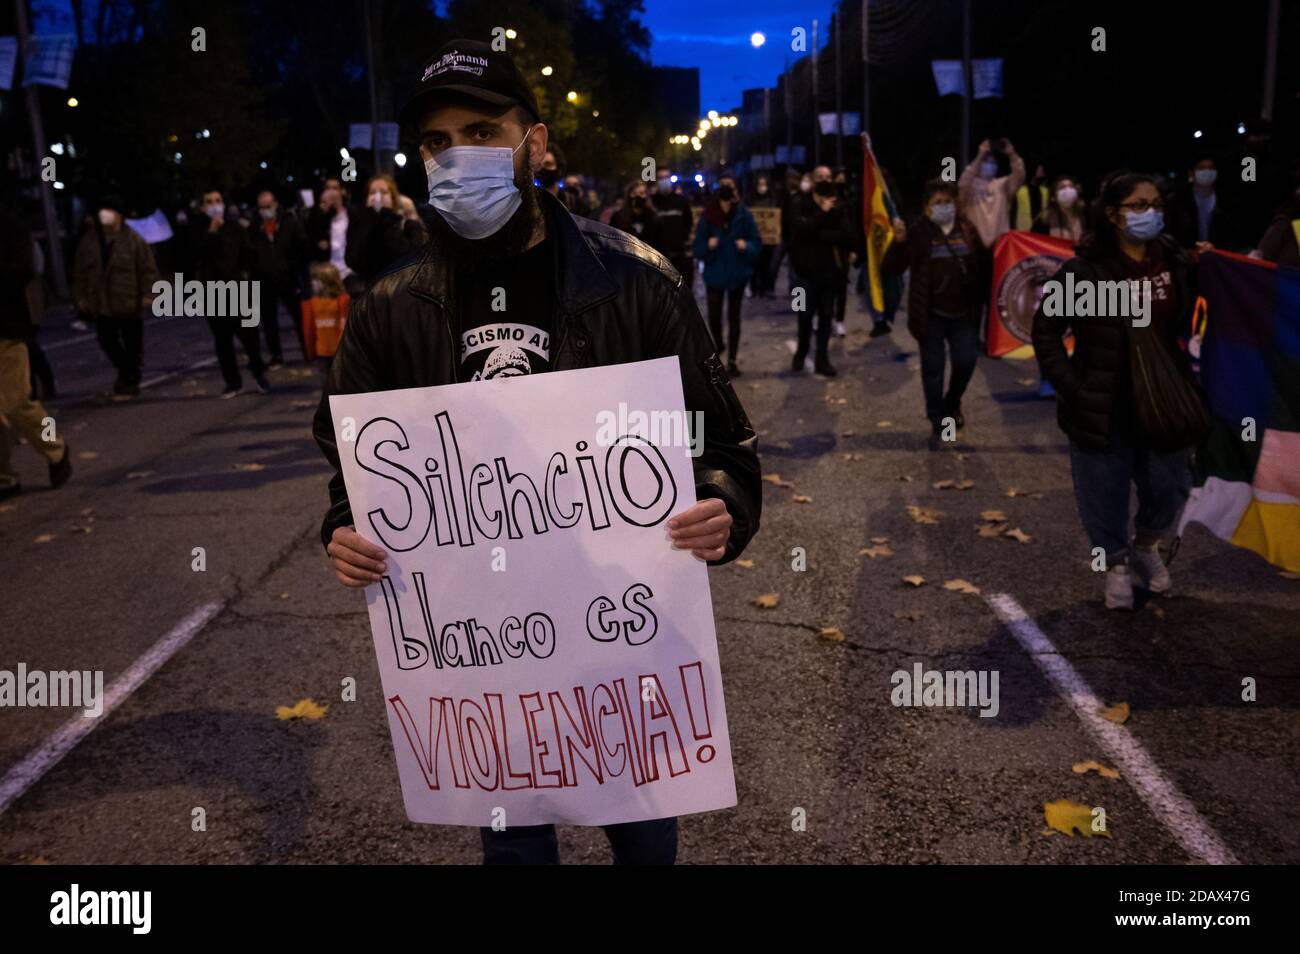 Madrid, Spain. 15th Nov, 2020. A man carrying a placard reading 'White science is violence' during a protest against racism and xenophobia. Credit: Marcos del Mazo/Alamy Live News Stock Photo